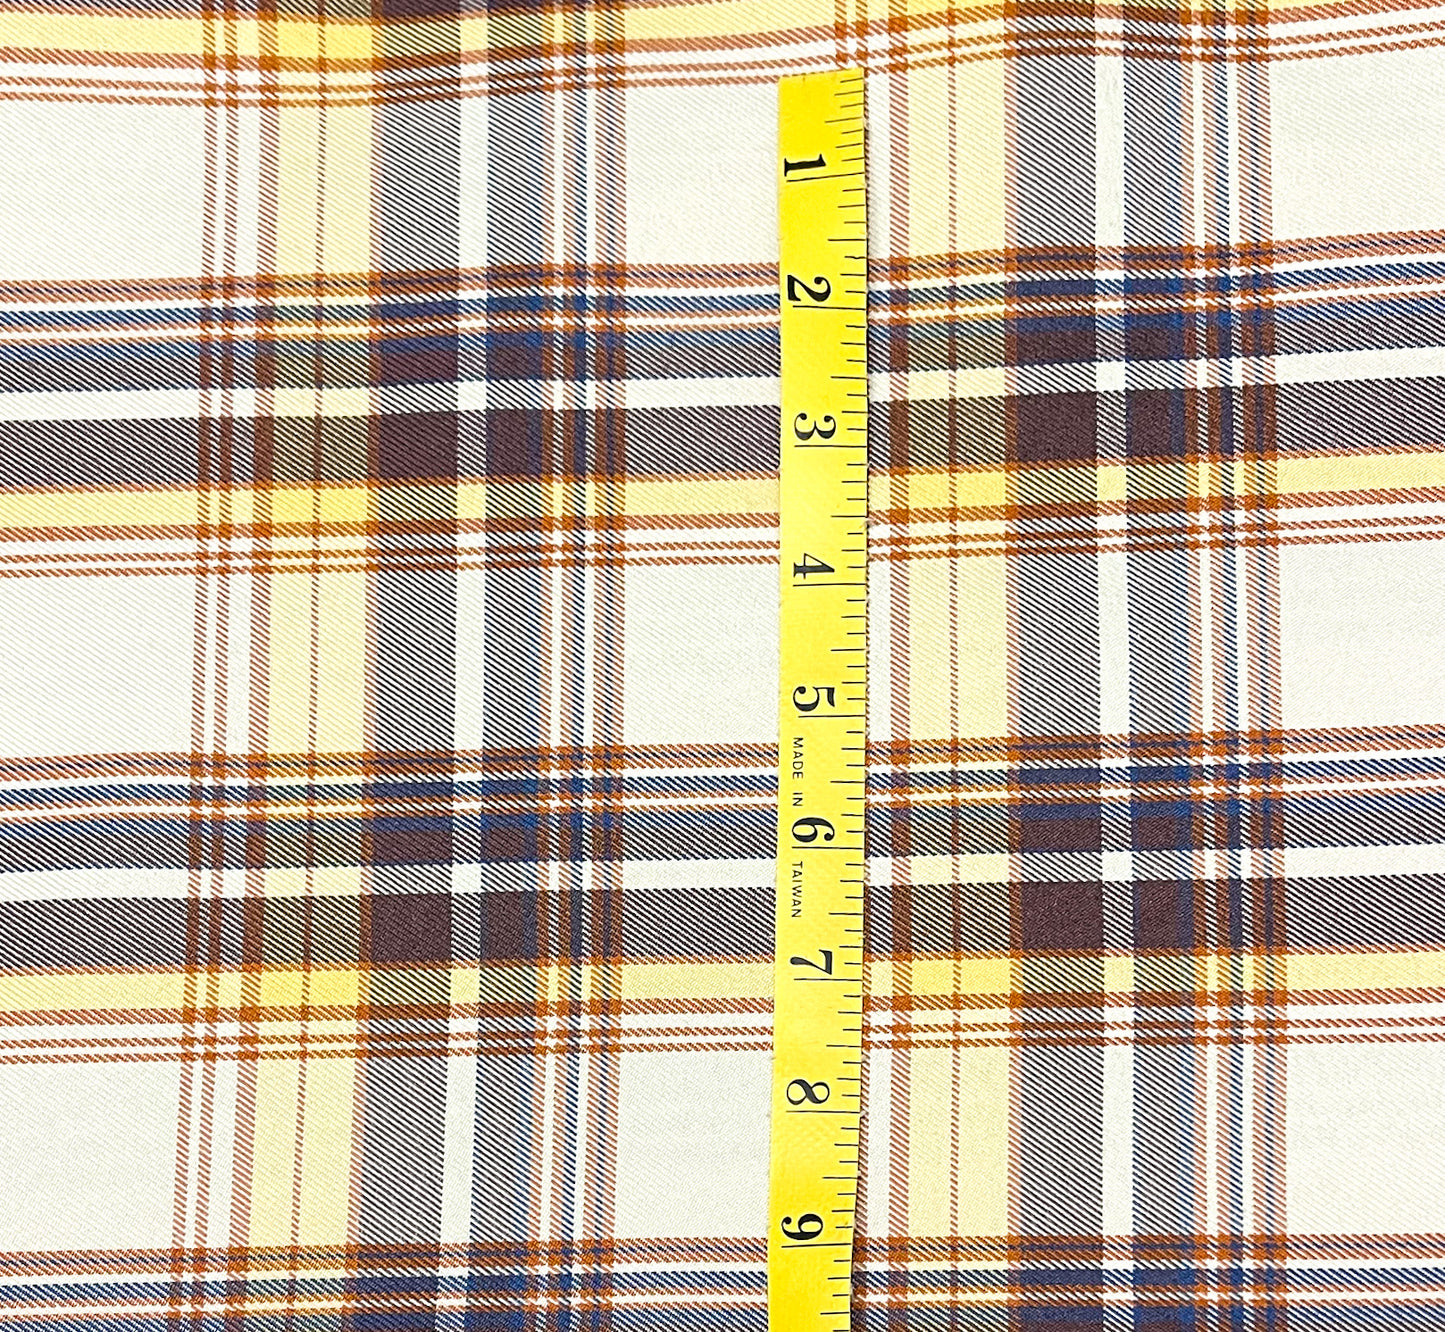 Plaid-yellow and brown